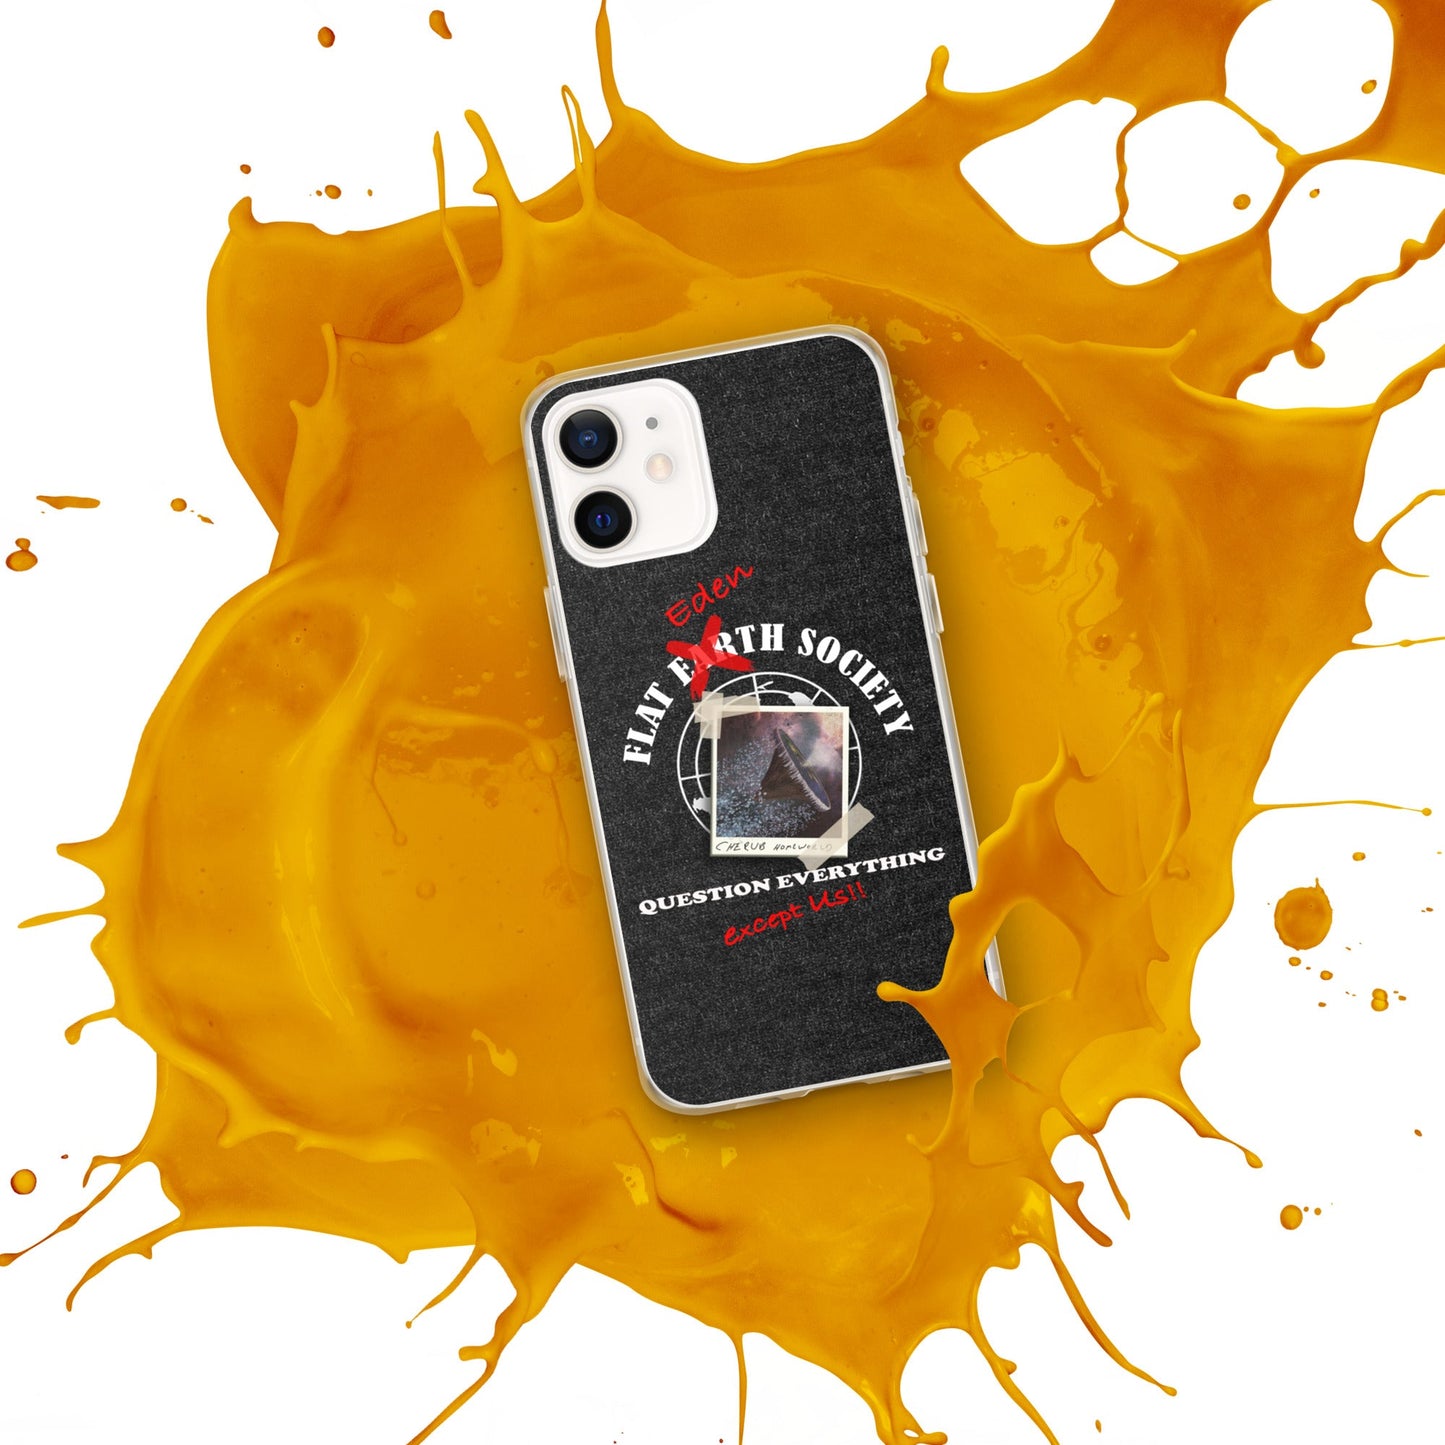 iPhone Case | Intergalactic Space Force 2 | Flat Eden Society - Spectral Ink Shop - Mobile Phone Cases -9780728_11704